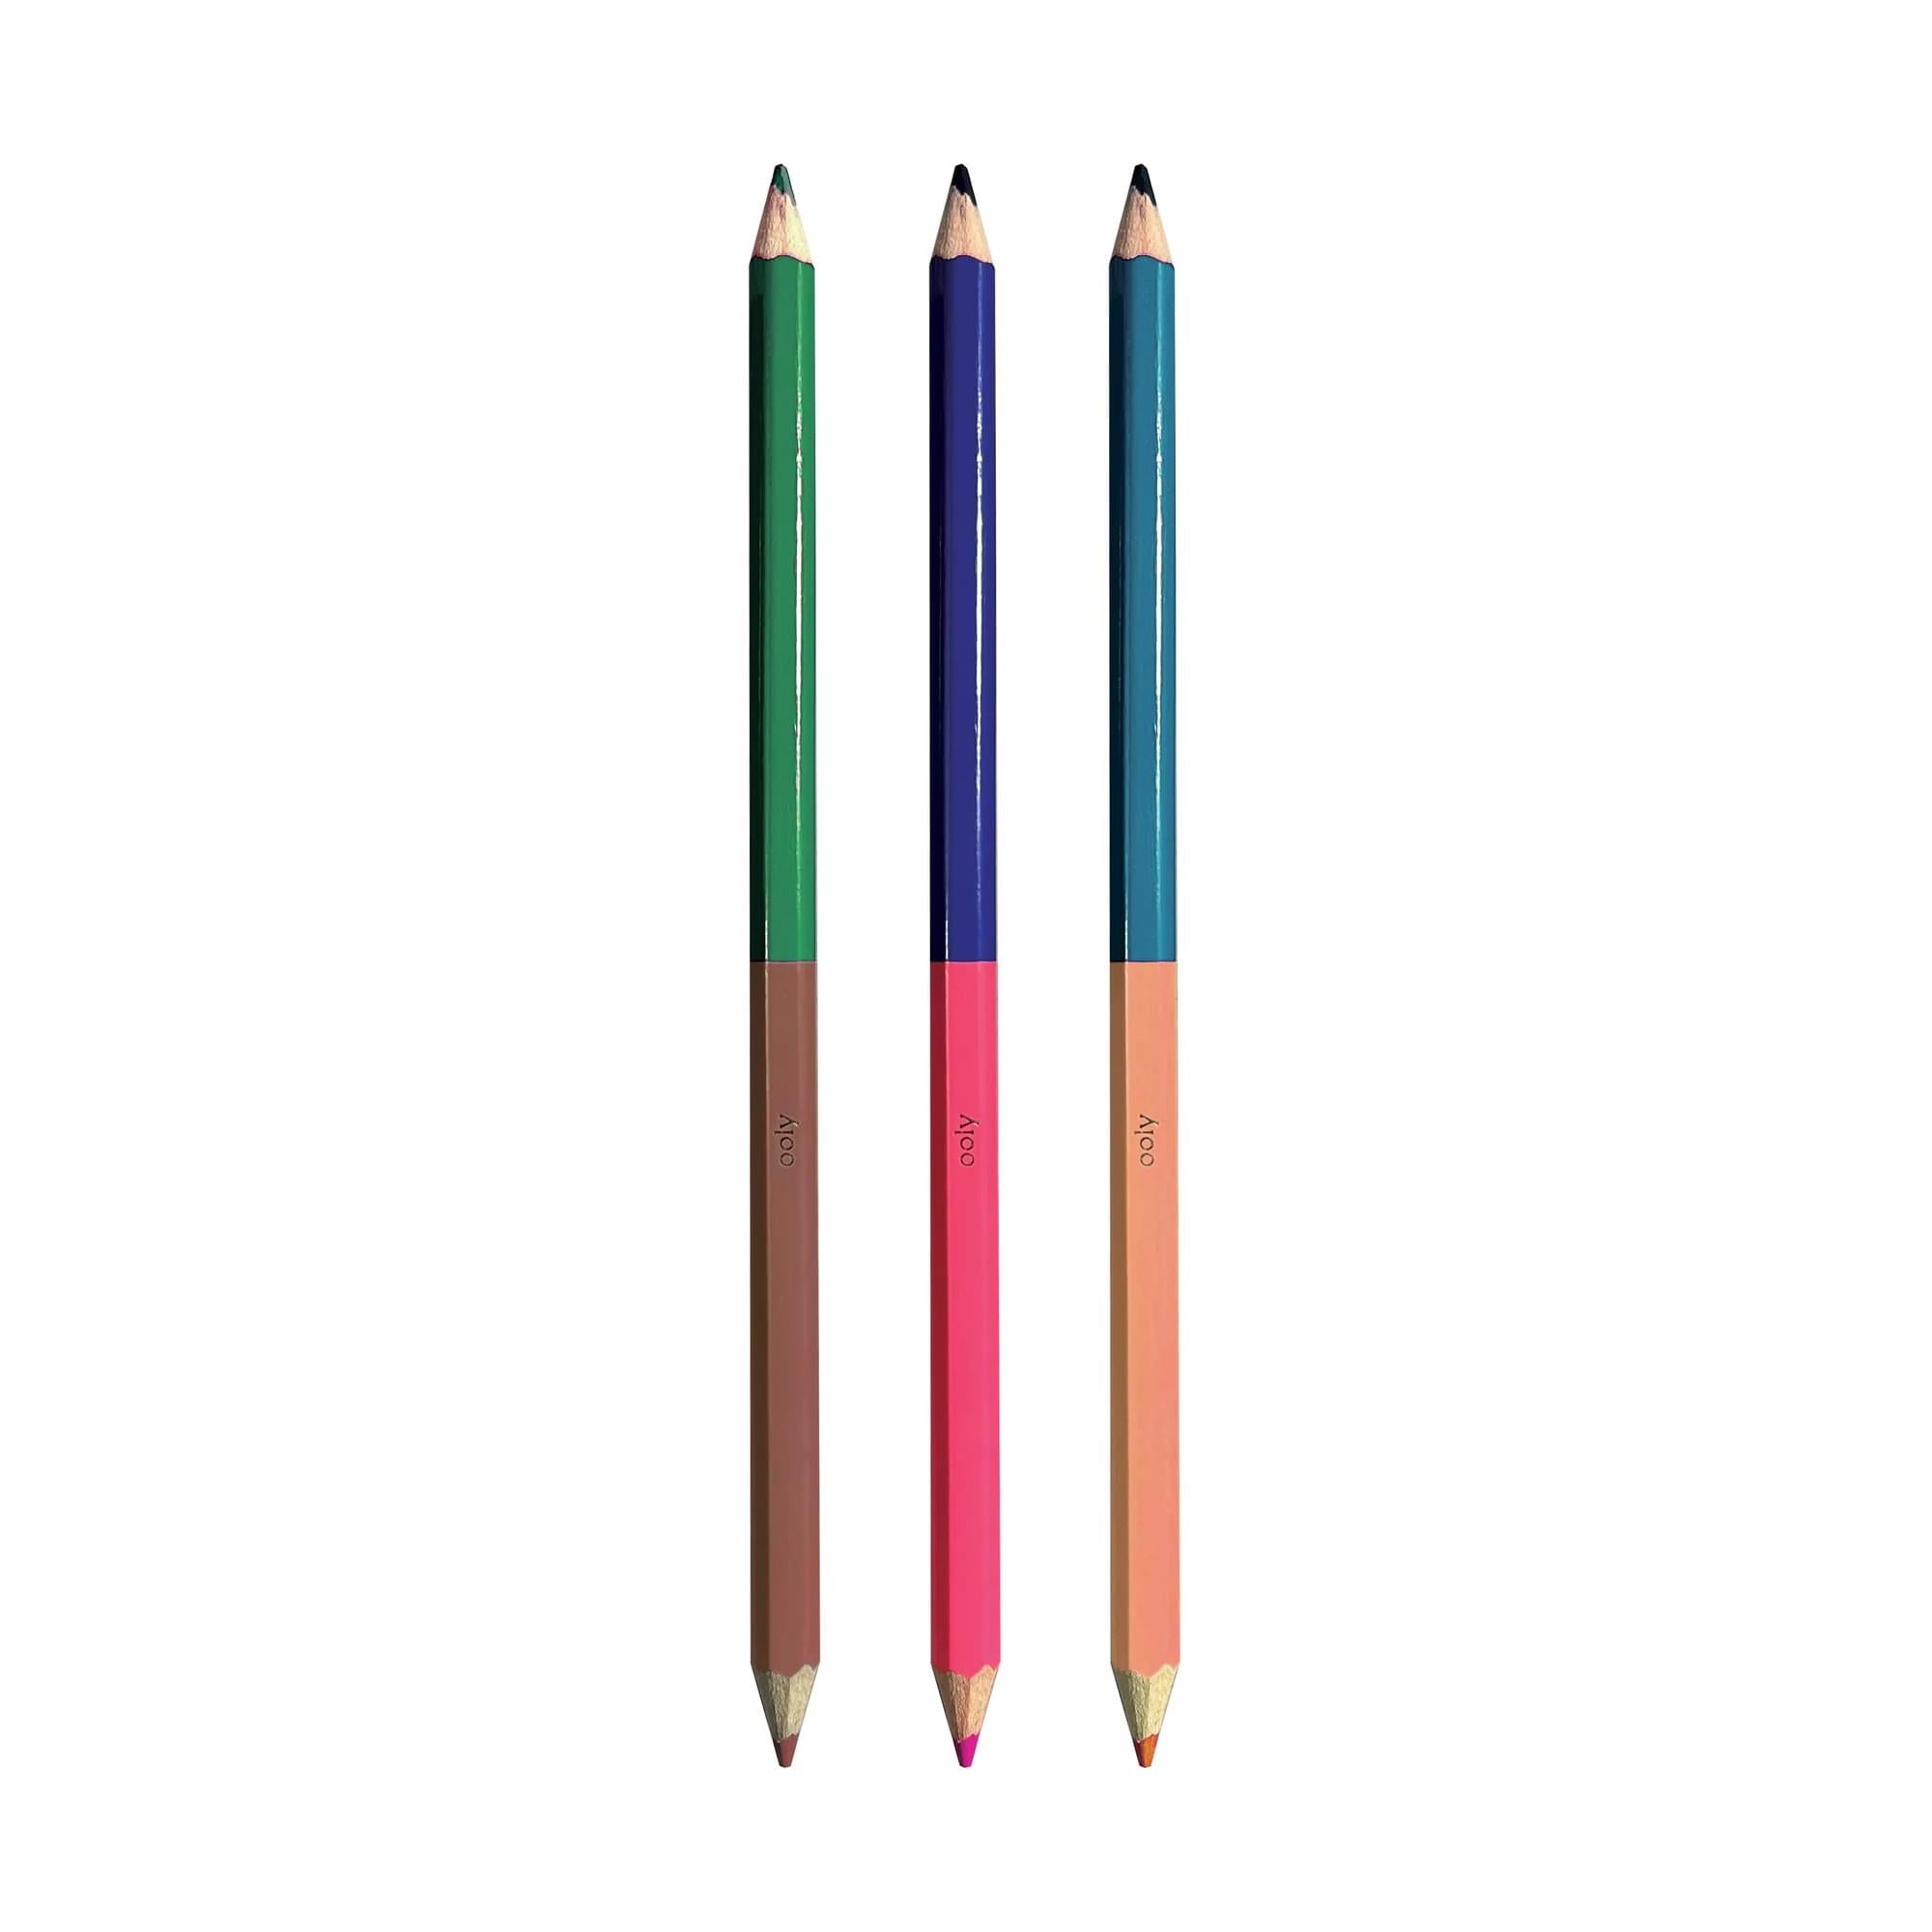 Ooly Color Together Colored Pencils - Set of 24